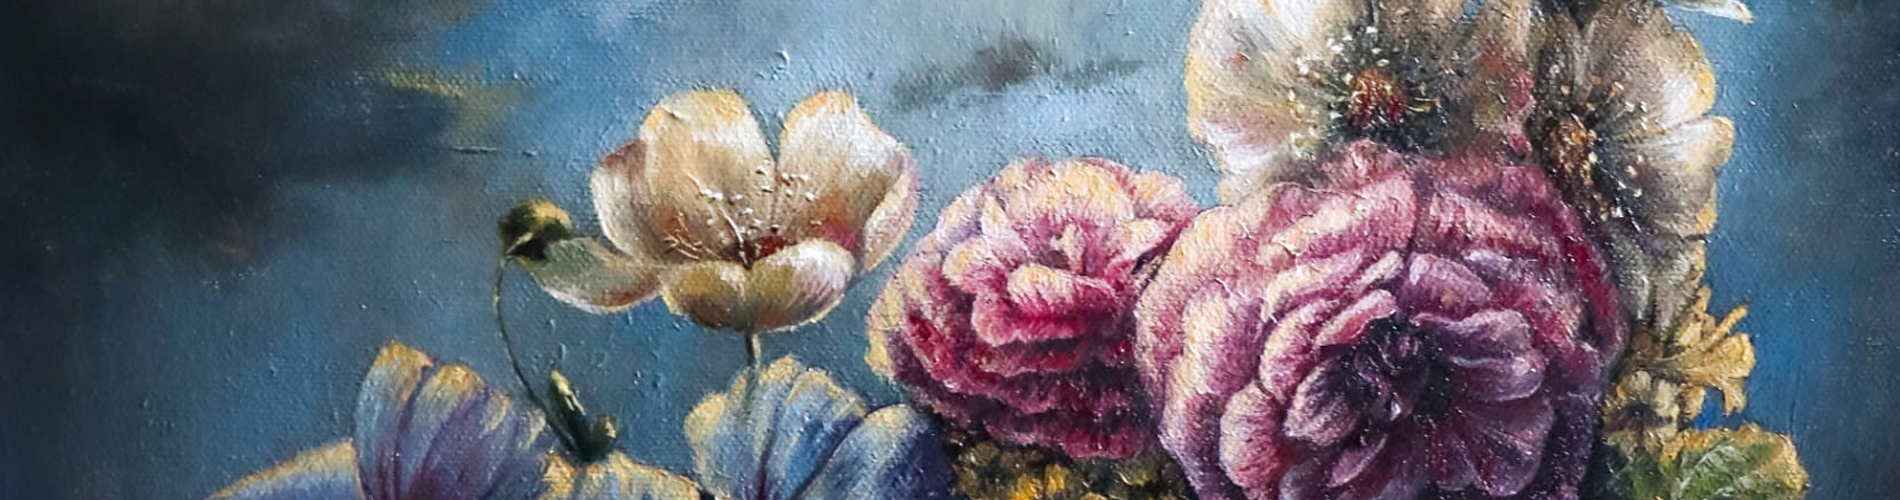 detail of oil painting of flowers